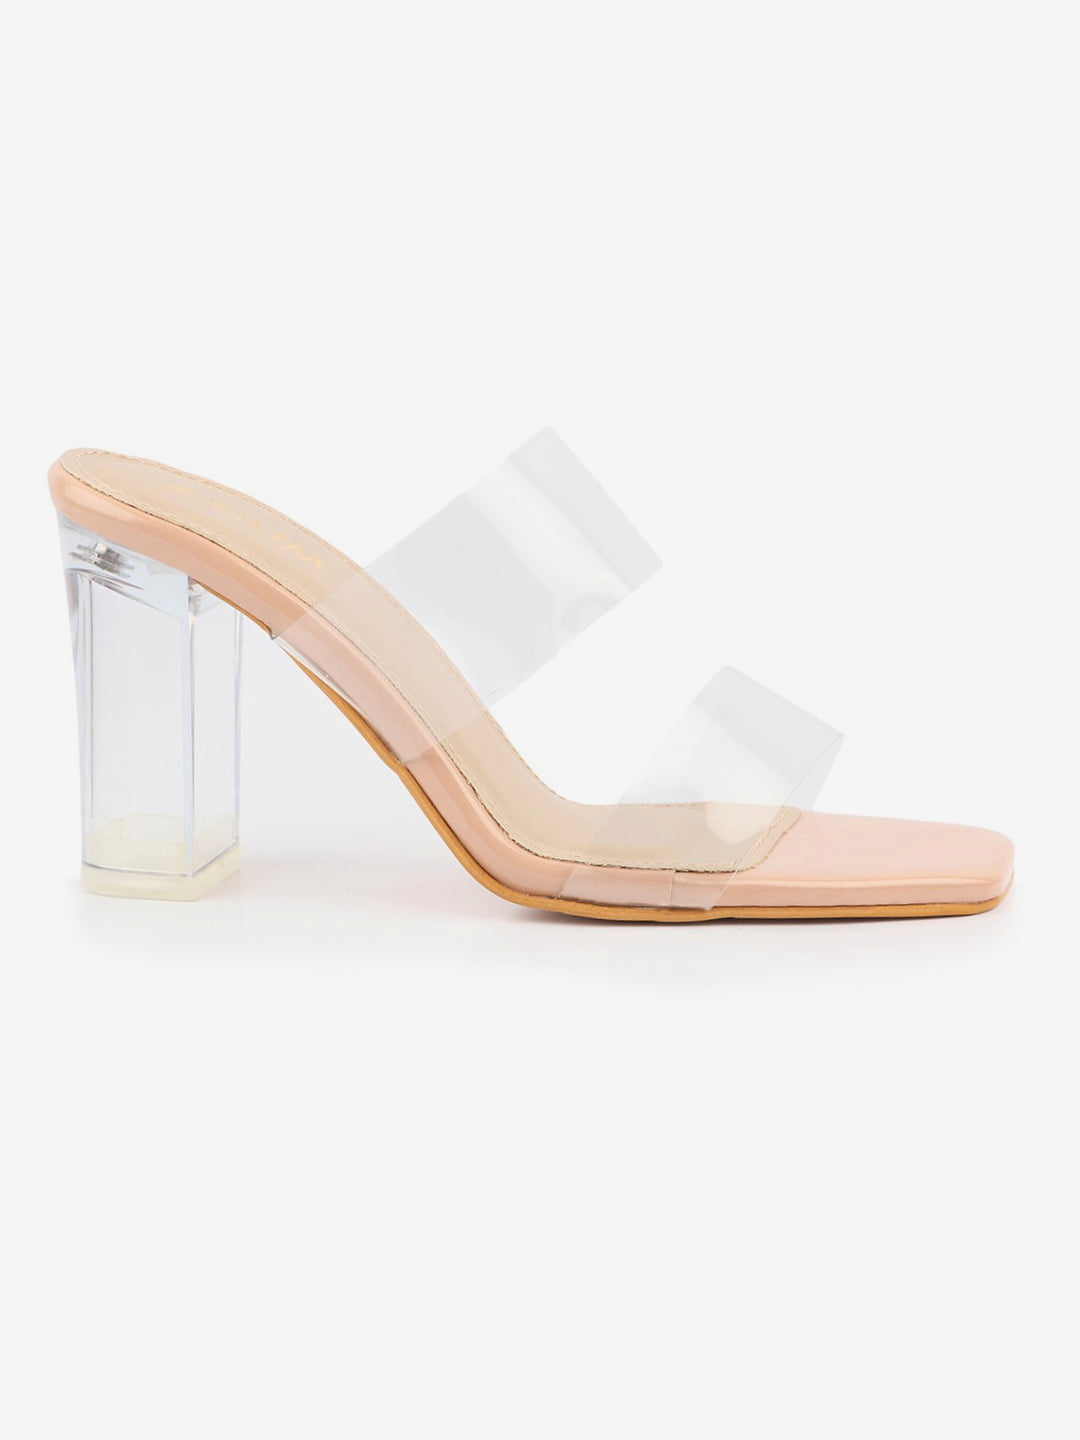 AXIUM 4 Inch Clear Chunky-High Heel Sandals (Nude Beige) - Axium®Shoes